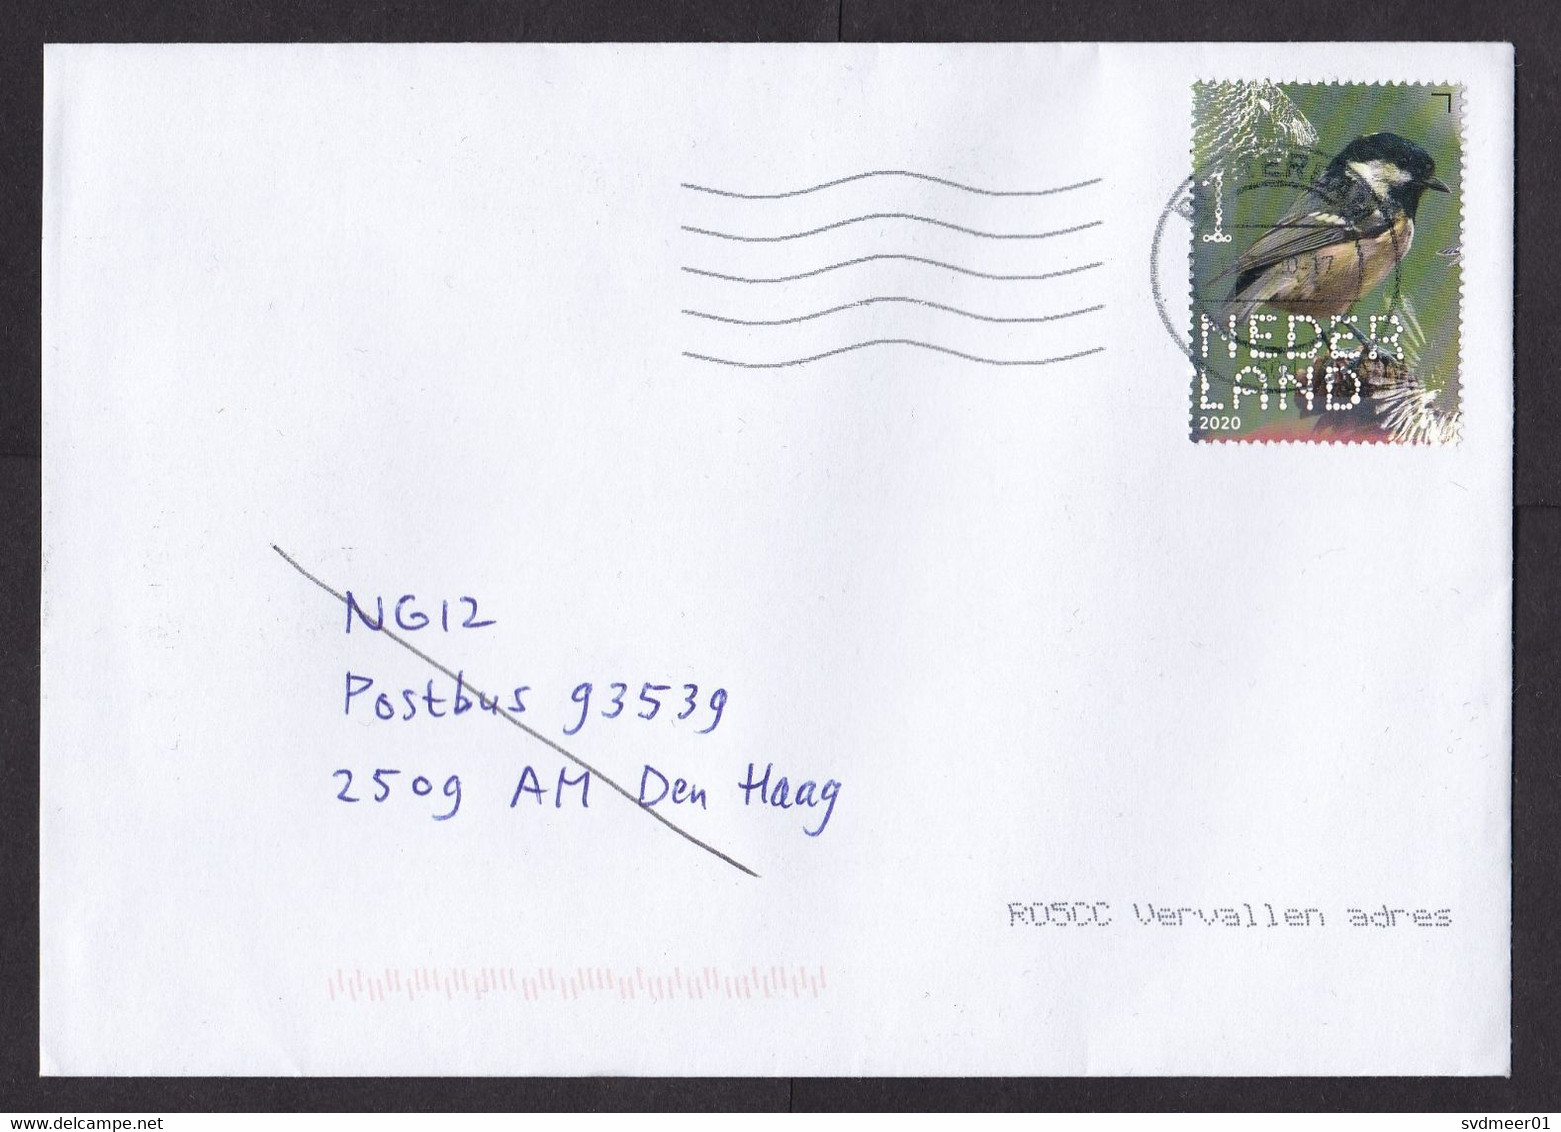 Netherlands: Cover, 2020, 1 Stamp, Titmouse Bird, Retour, Returned, Printed Address Cancelled (traces Of Use) - Lettres & Documents